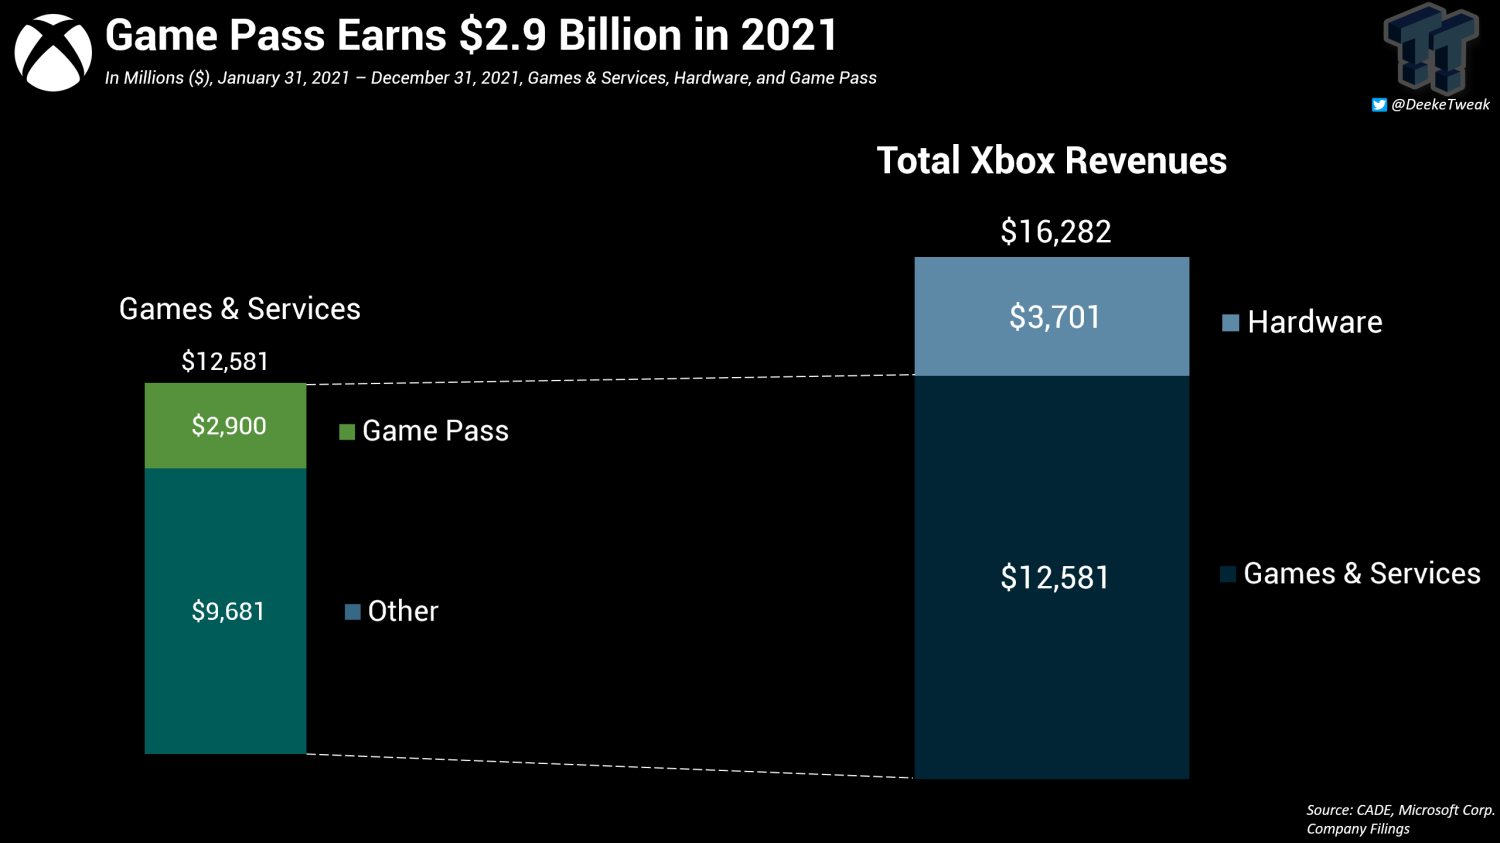 How Much Does Microsoft Make From Game Pass?